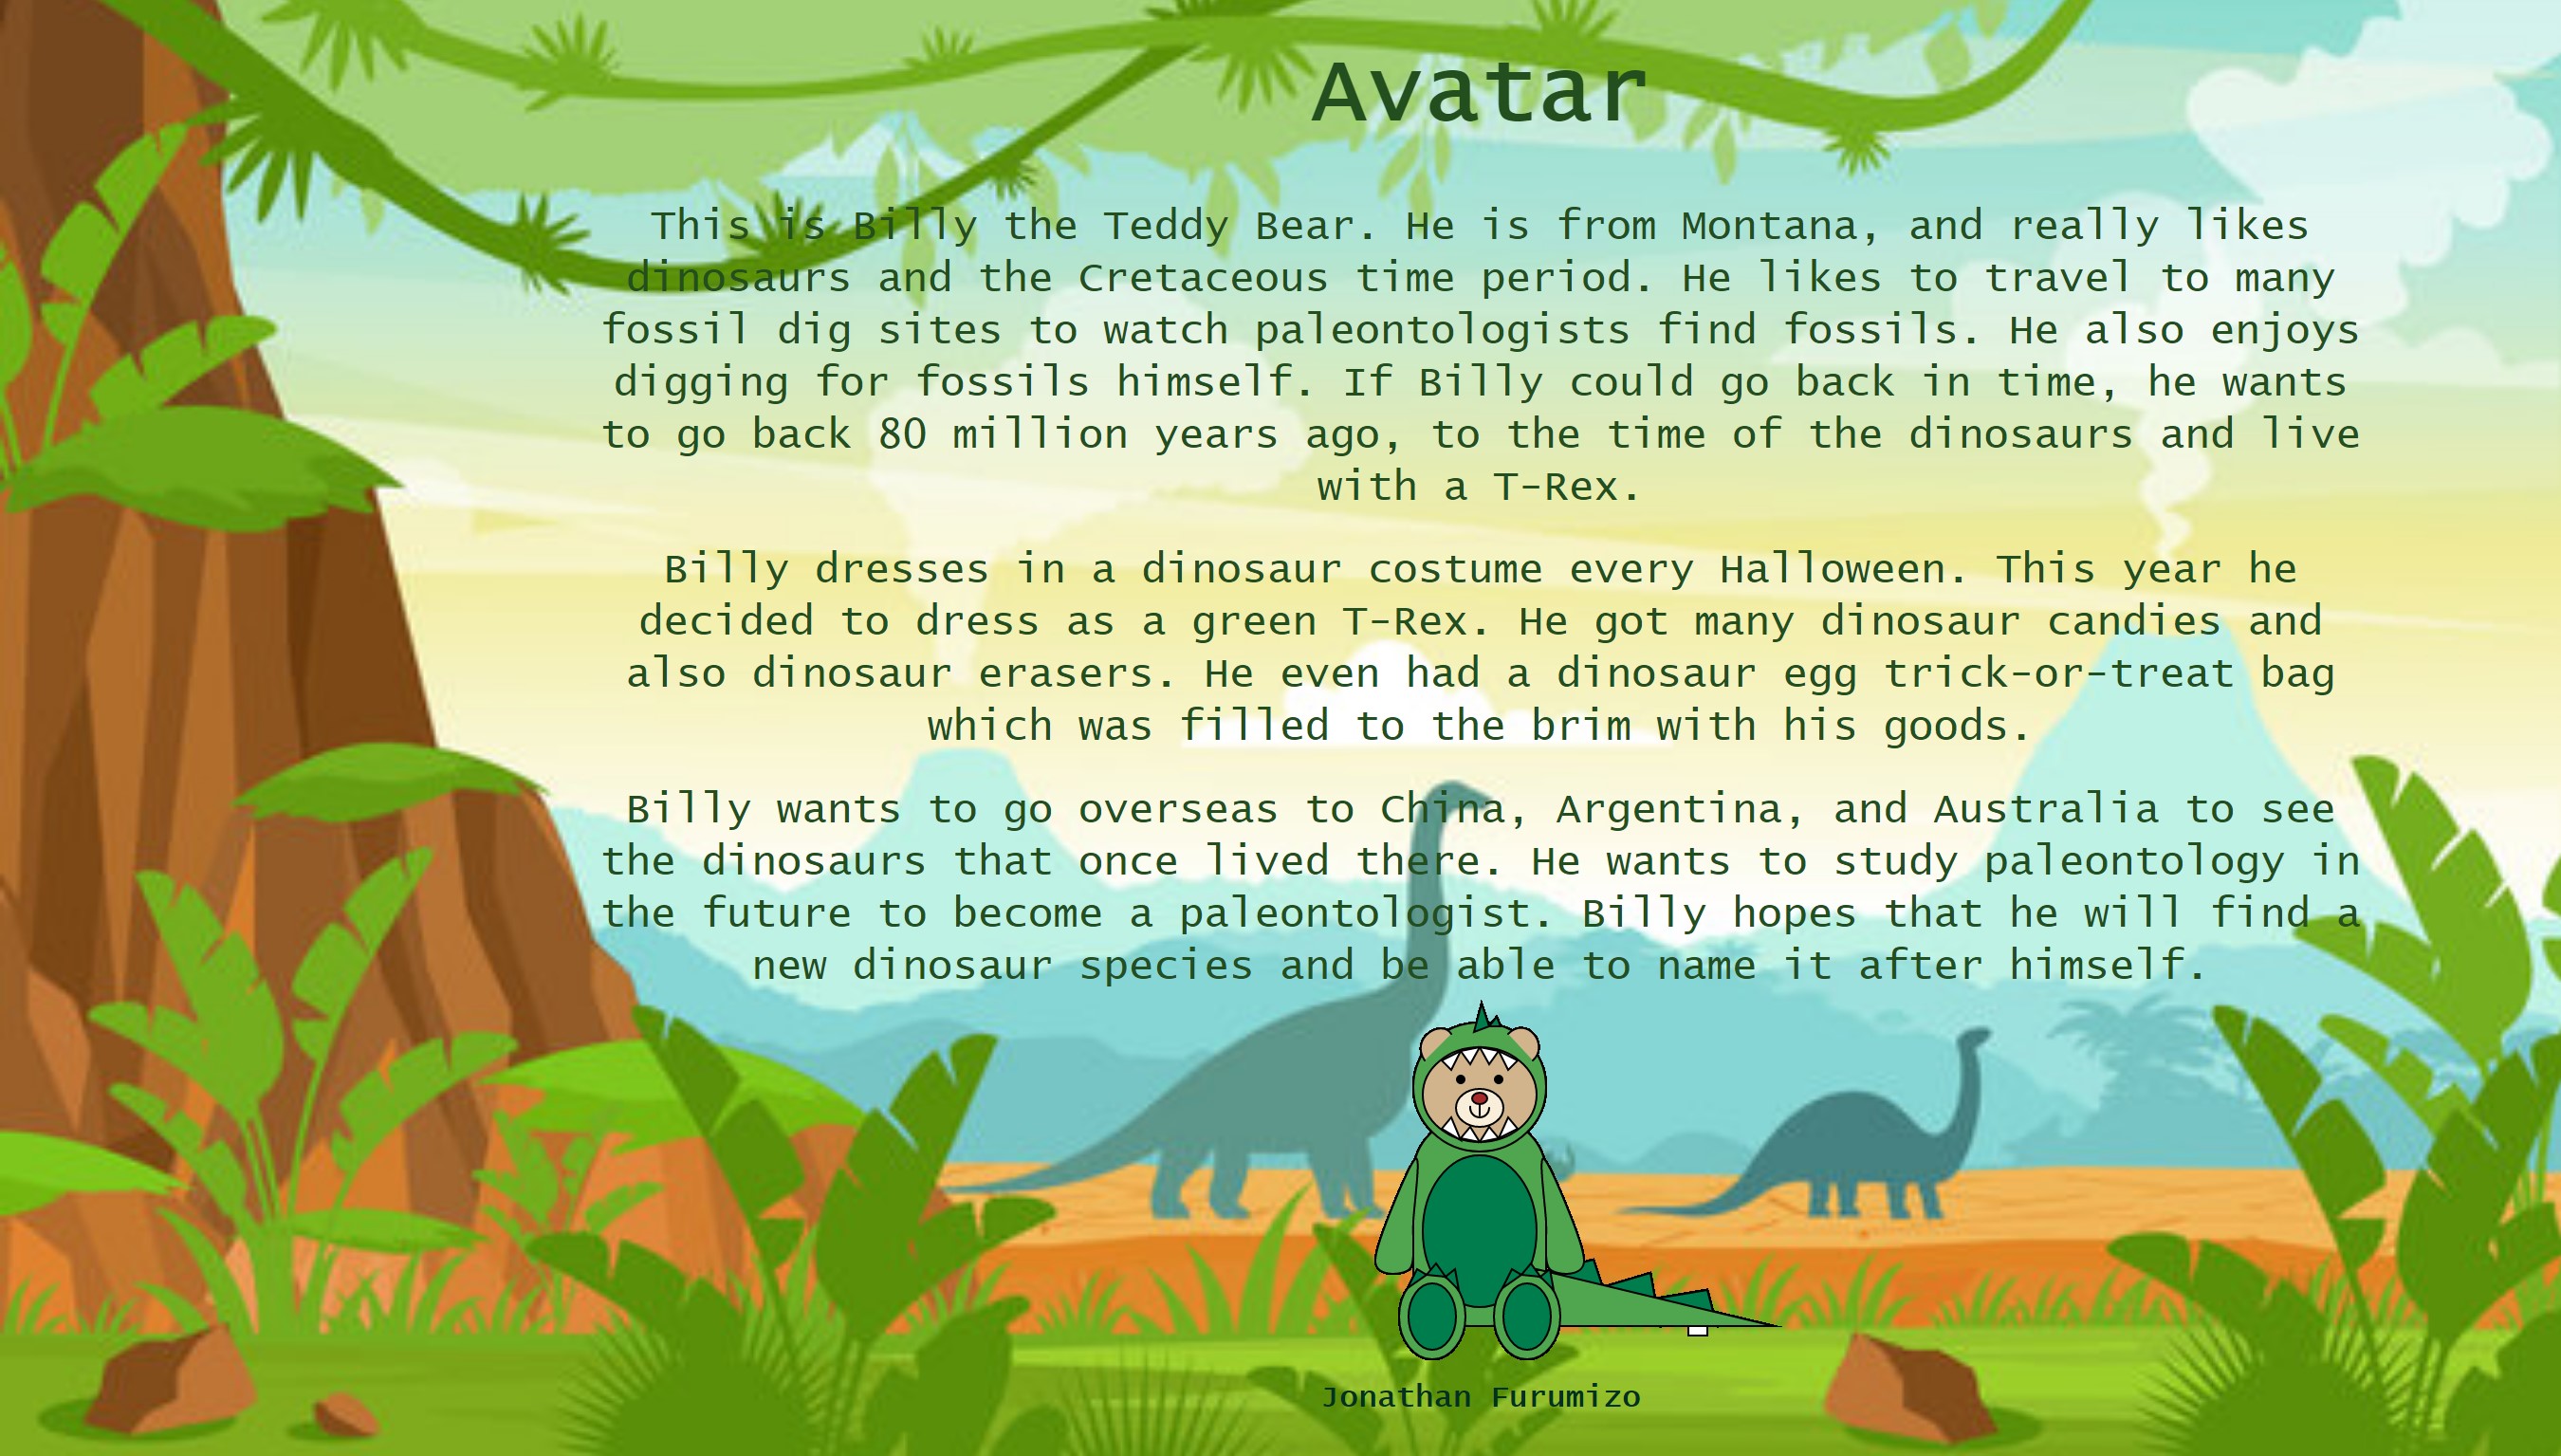 8/23/21: Created an Avatar and its biography.